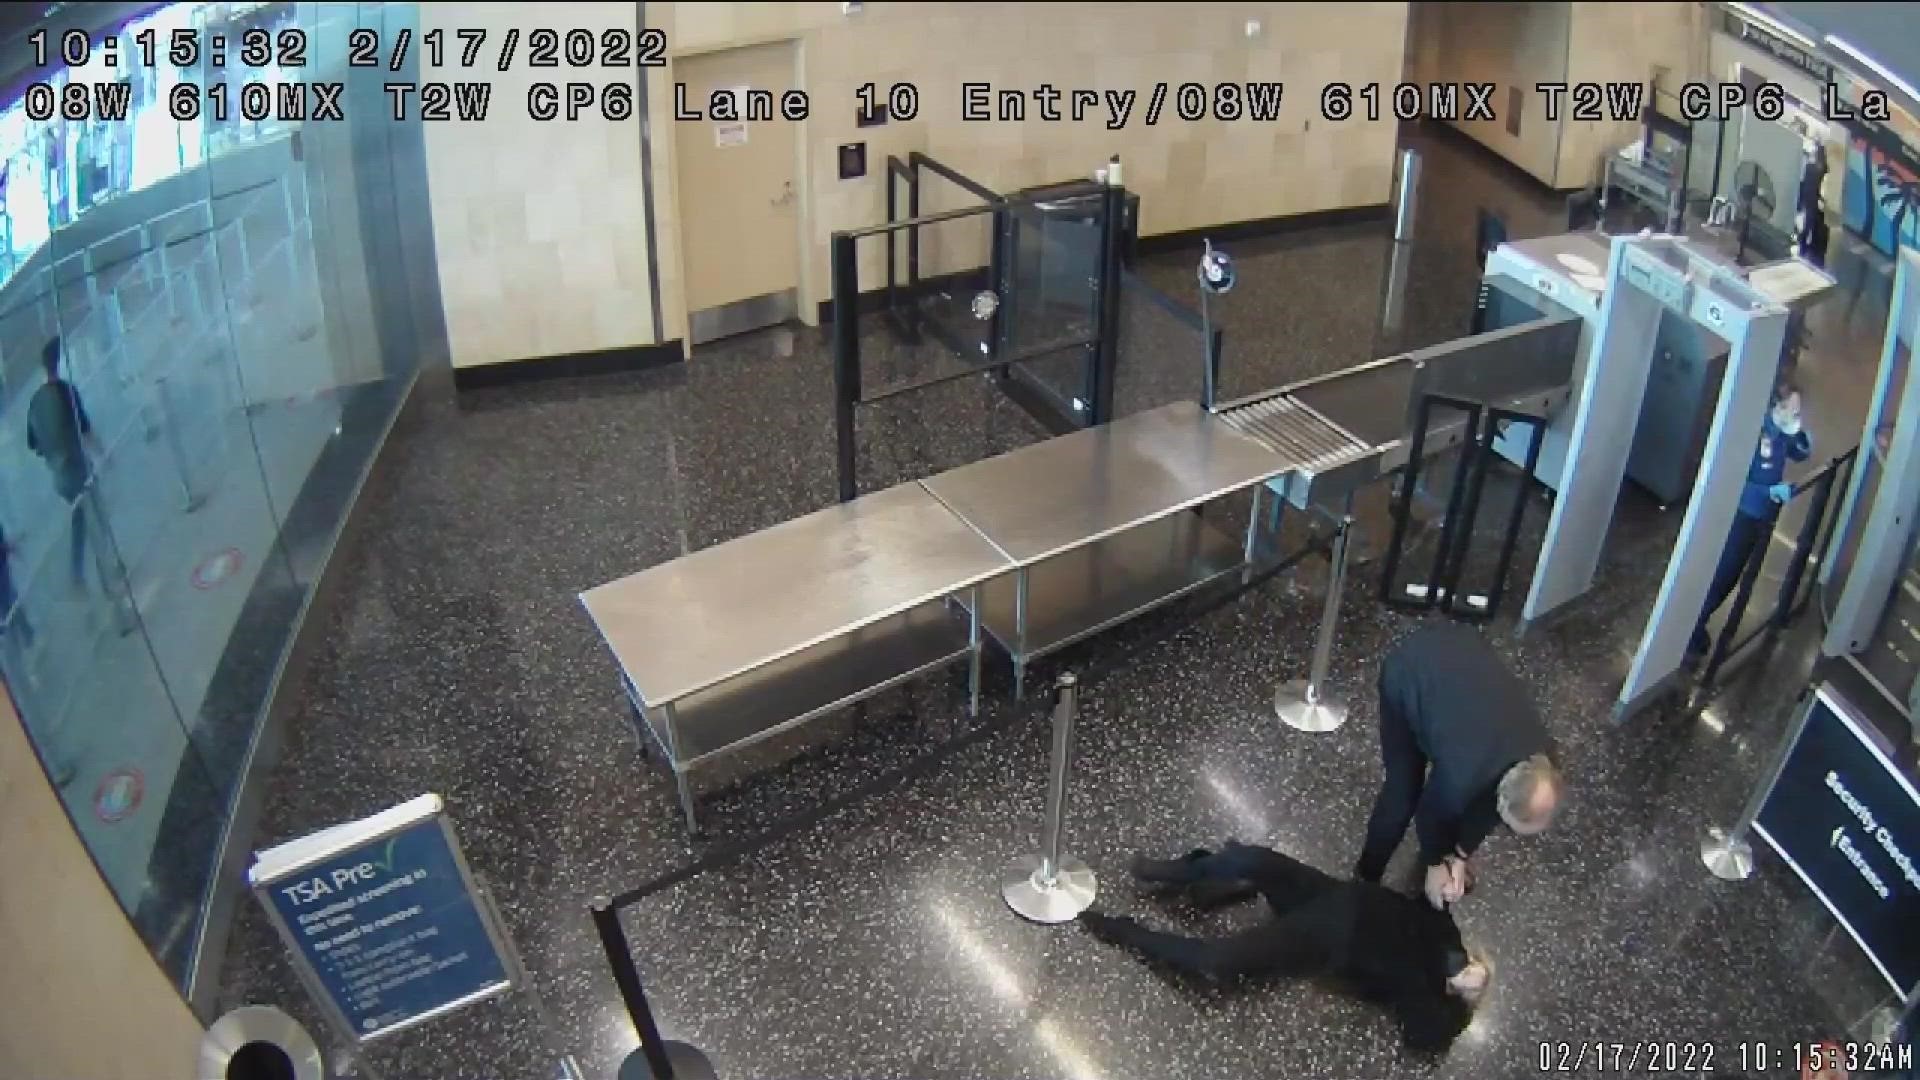 Video inside the San Diego Airport showed TSA did not render aid after a woman fell and suffered from a brain injury.